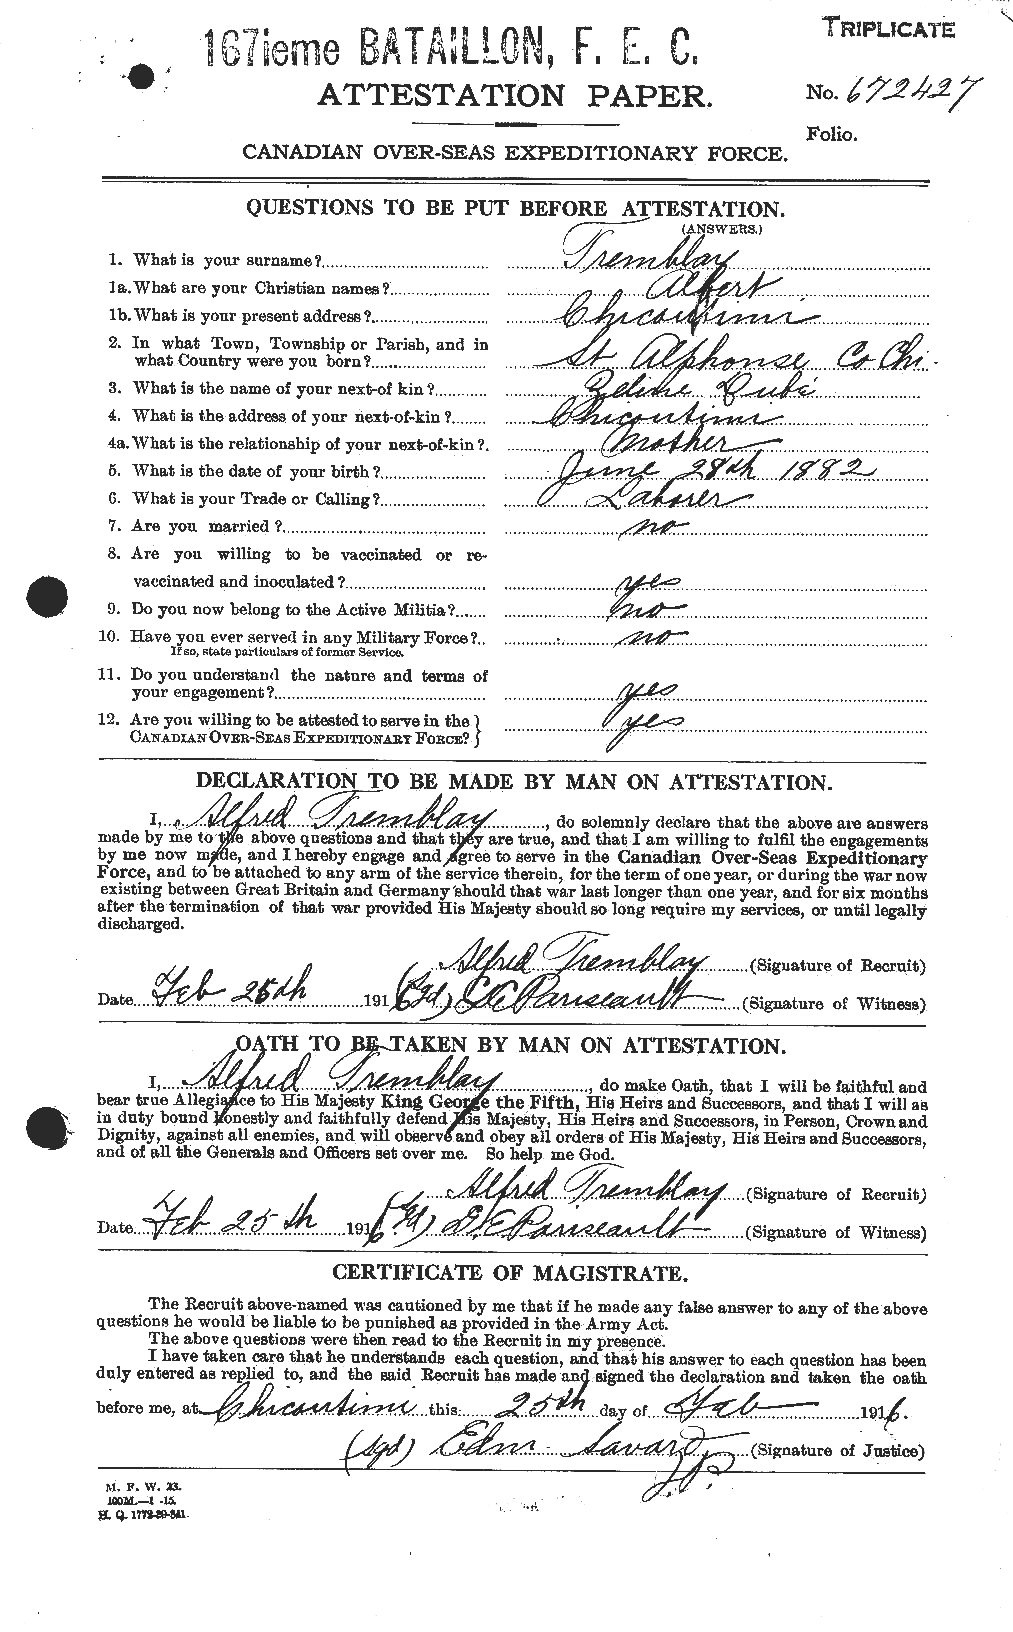 Personnel Records of the First World War - CEF 637574a